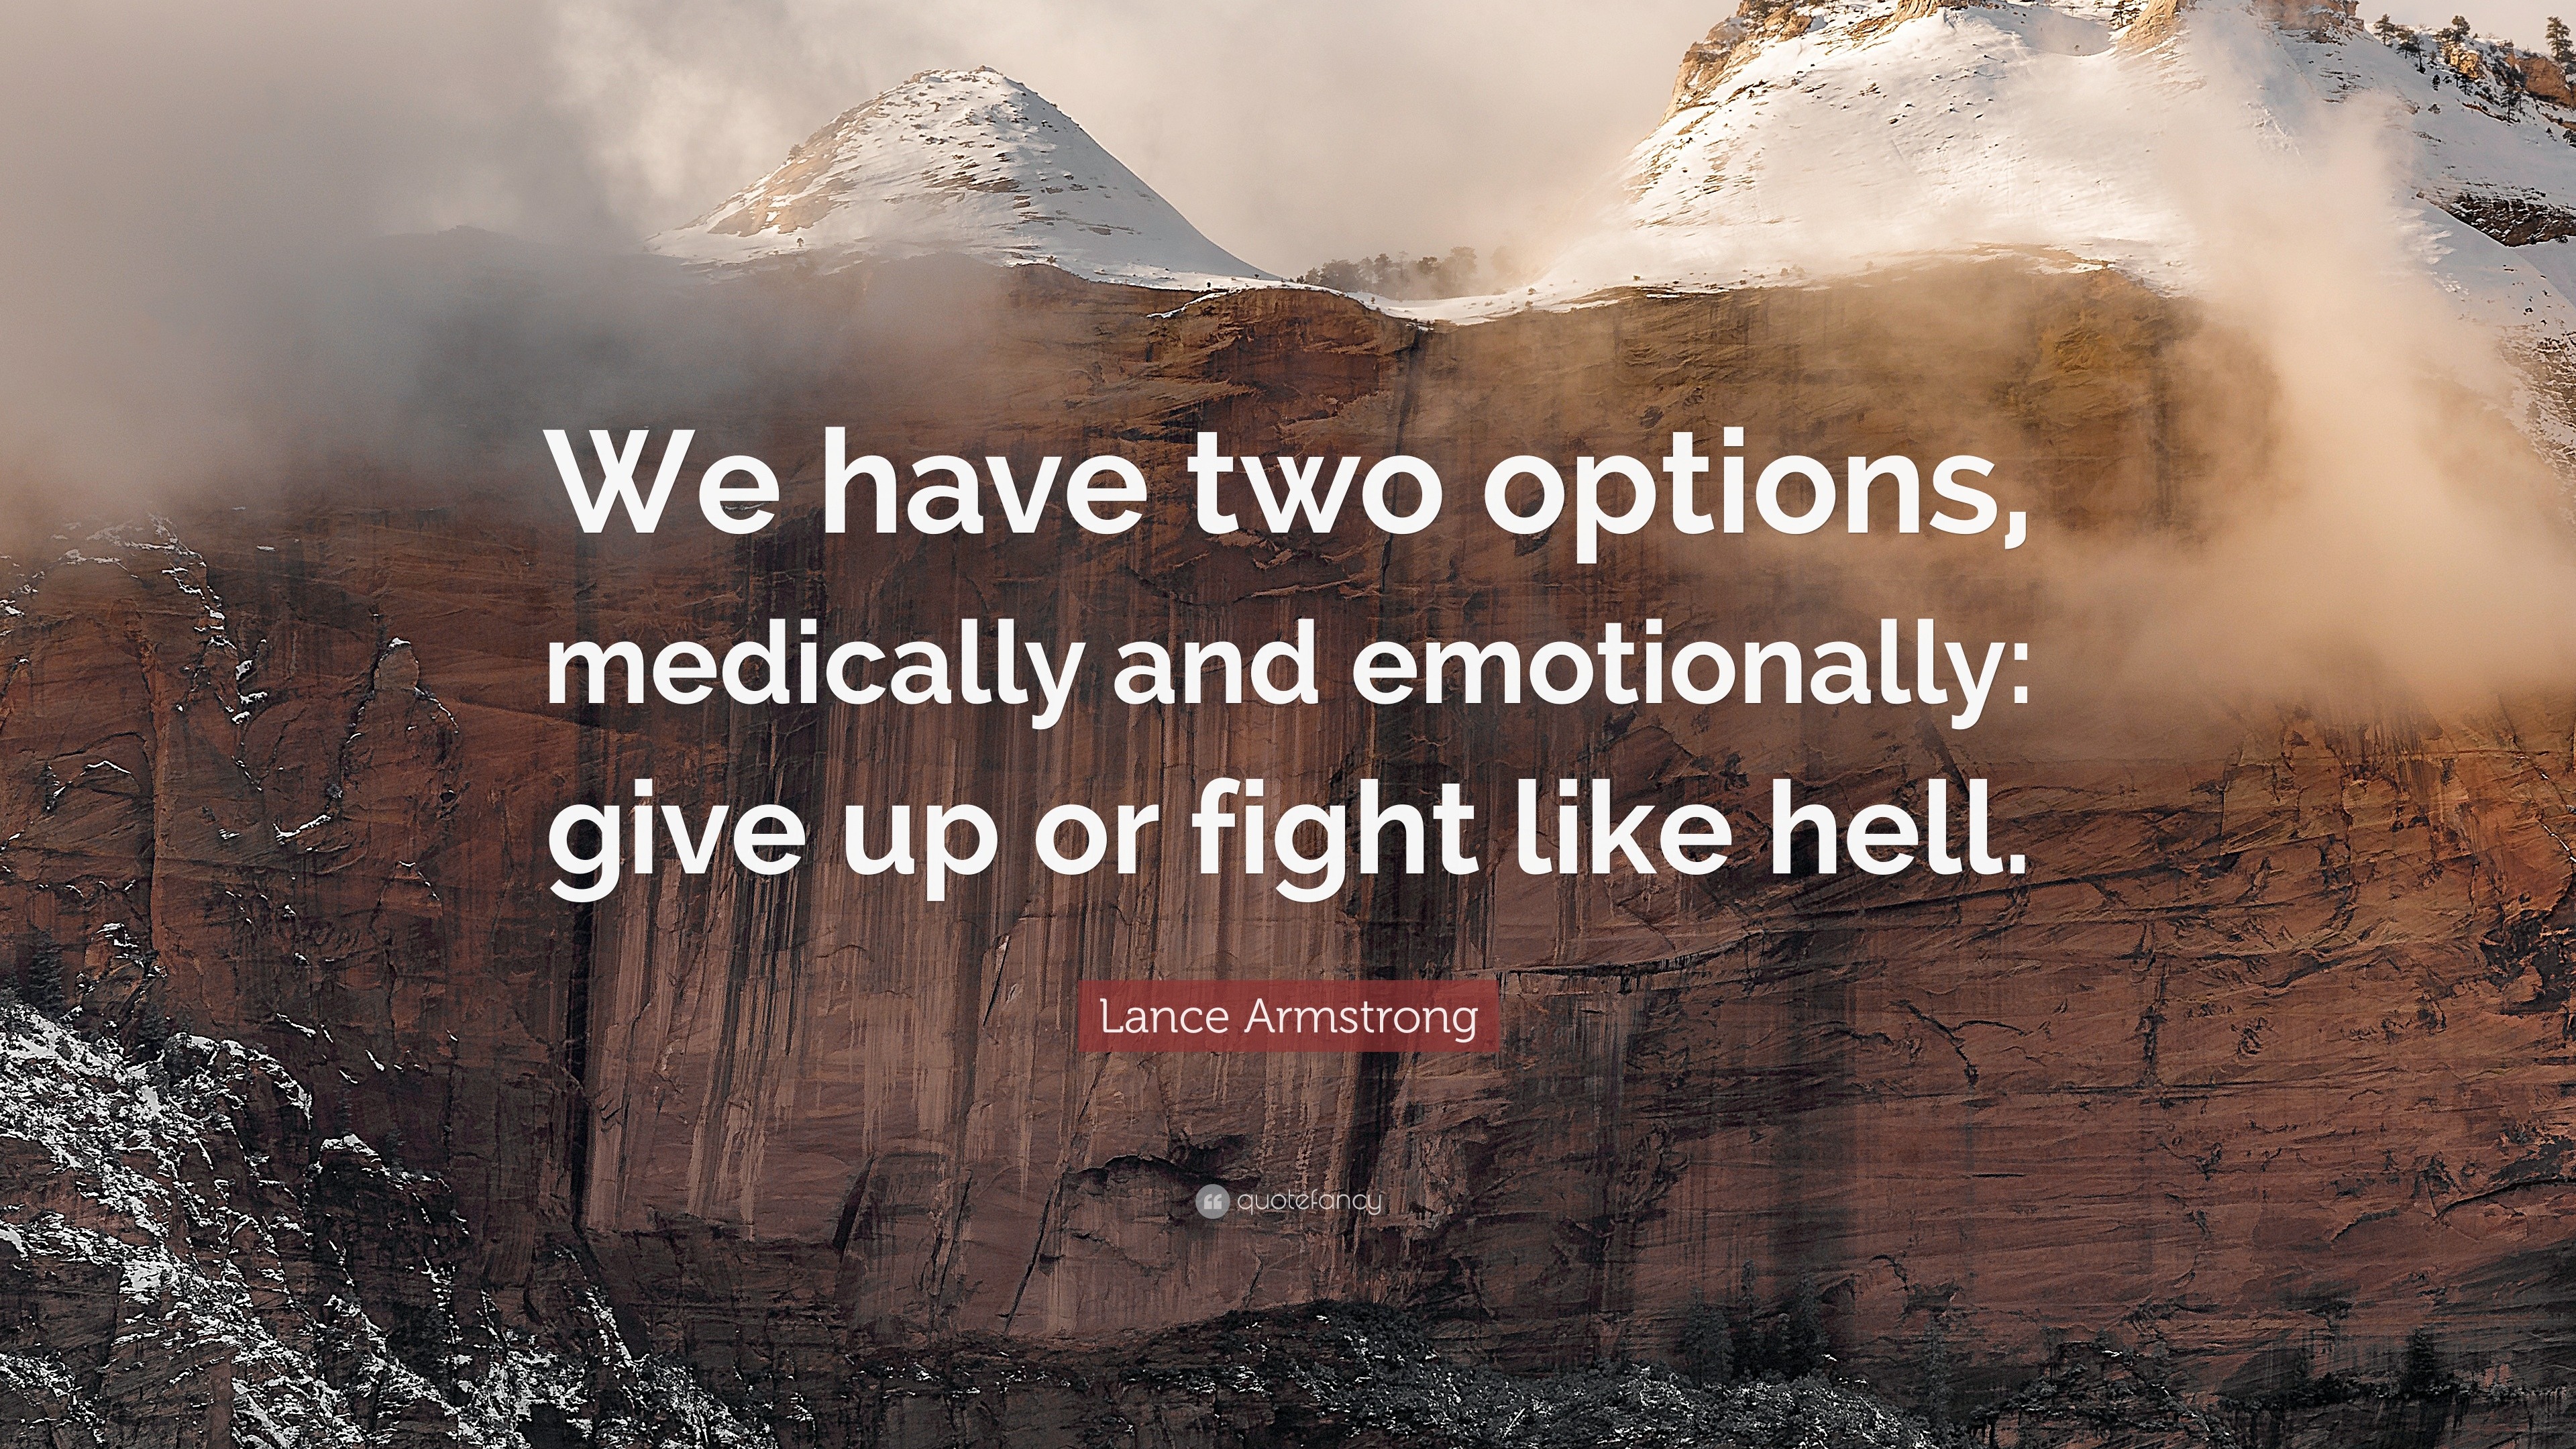 Lance Armstrong Quote “We have two options medically and emotionally give up